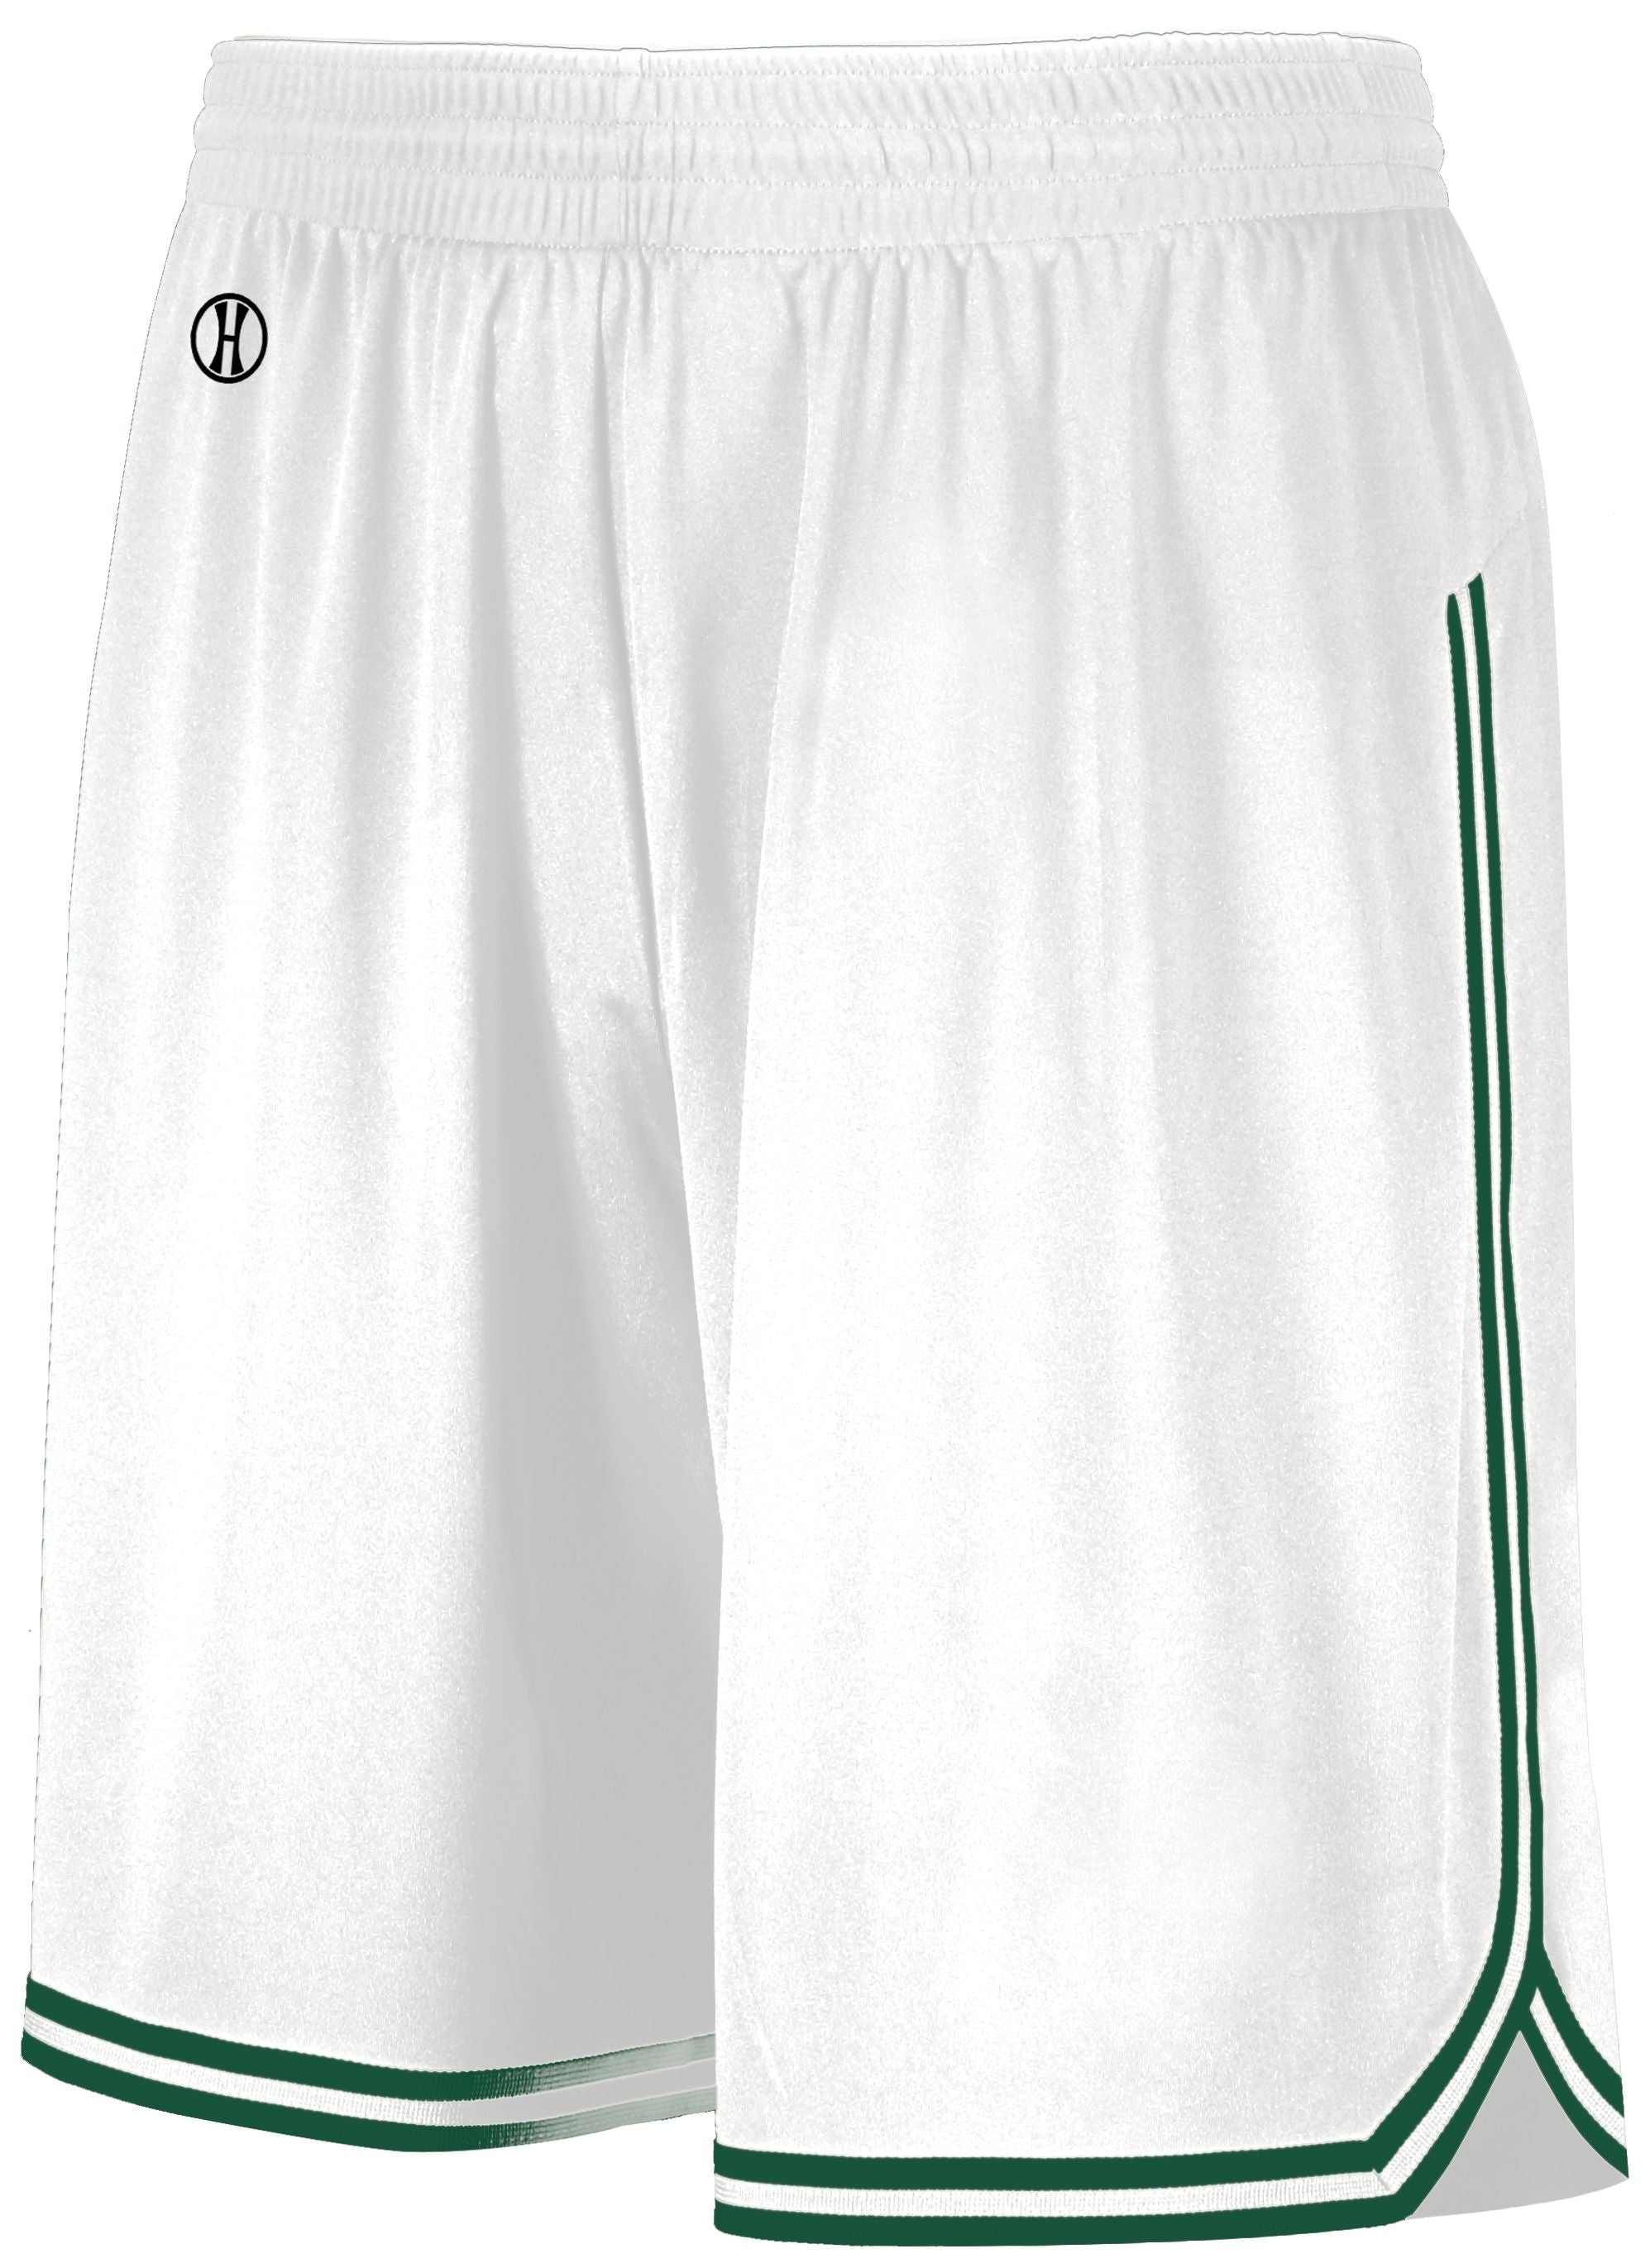 Holloway Retro Basketball Shorts in White/Forest  -Part of the Adult, Adult-Shorts, Basketball, Holloway, All-Sports, All-Sports-1 product lines at KanaleyCreations.com